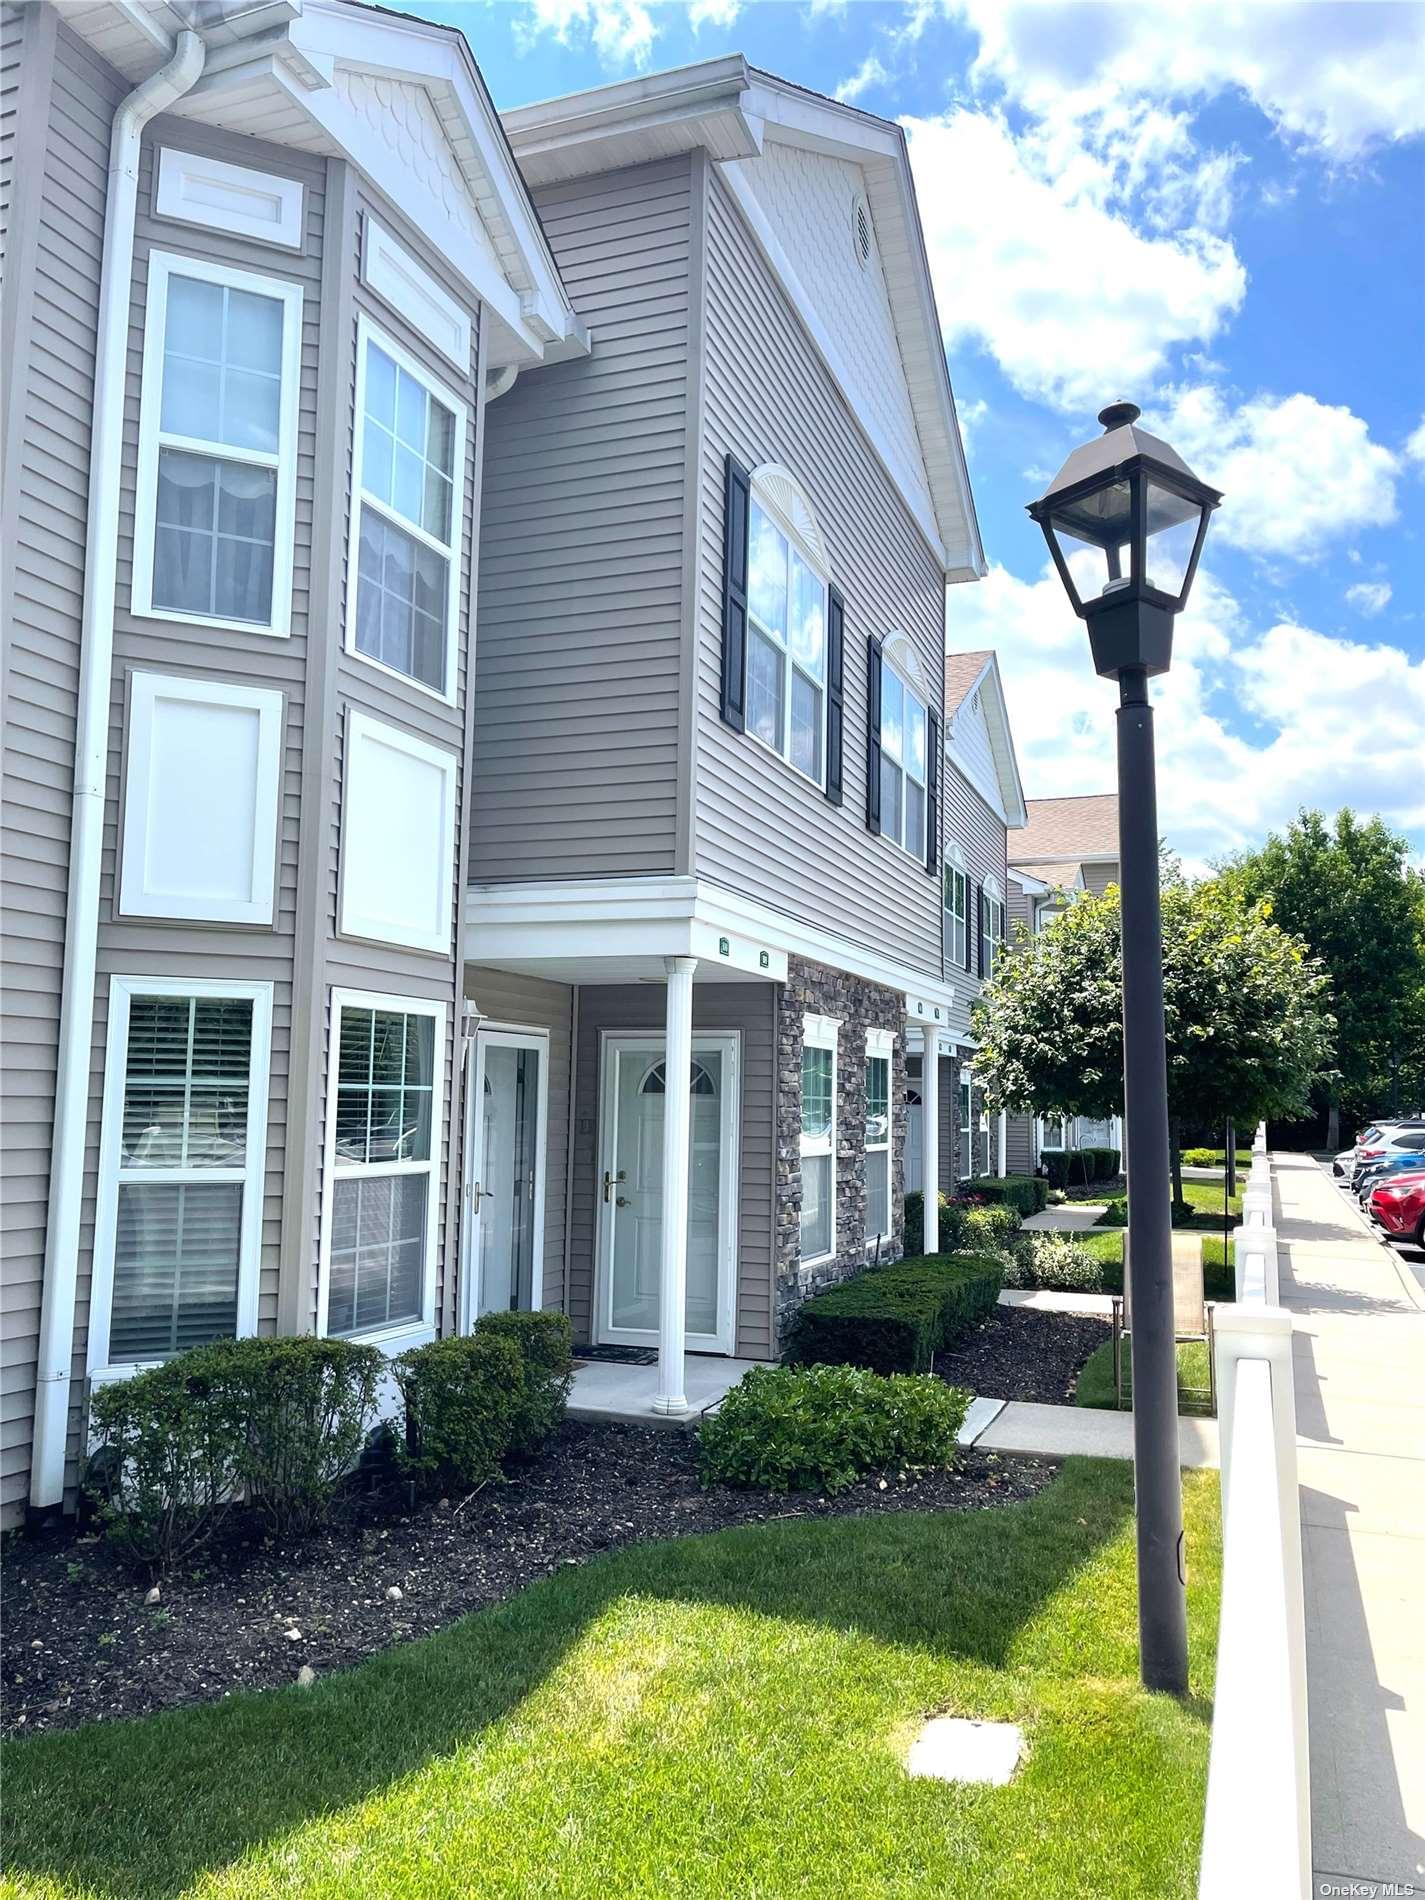 101 Spring Drive #101 in Long Island, East Meadow, NY 11554